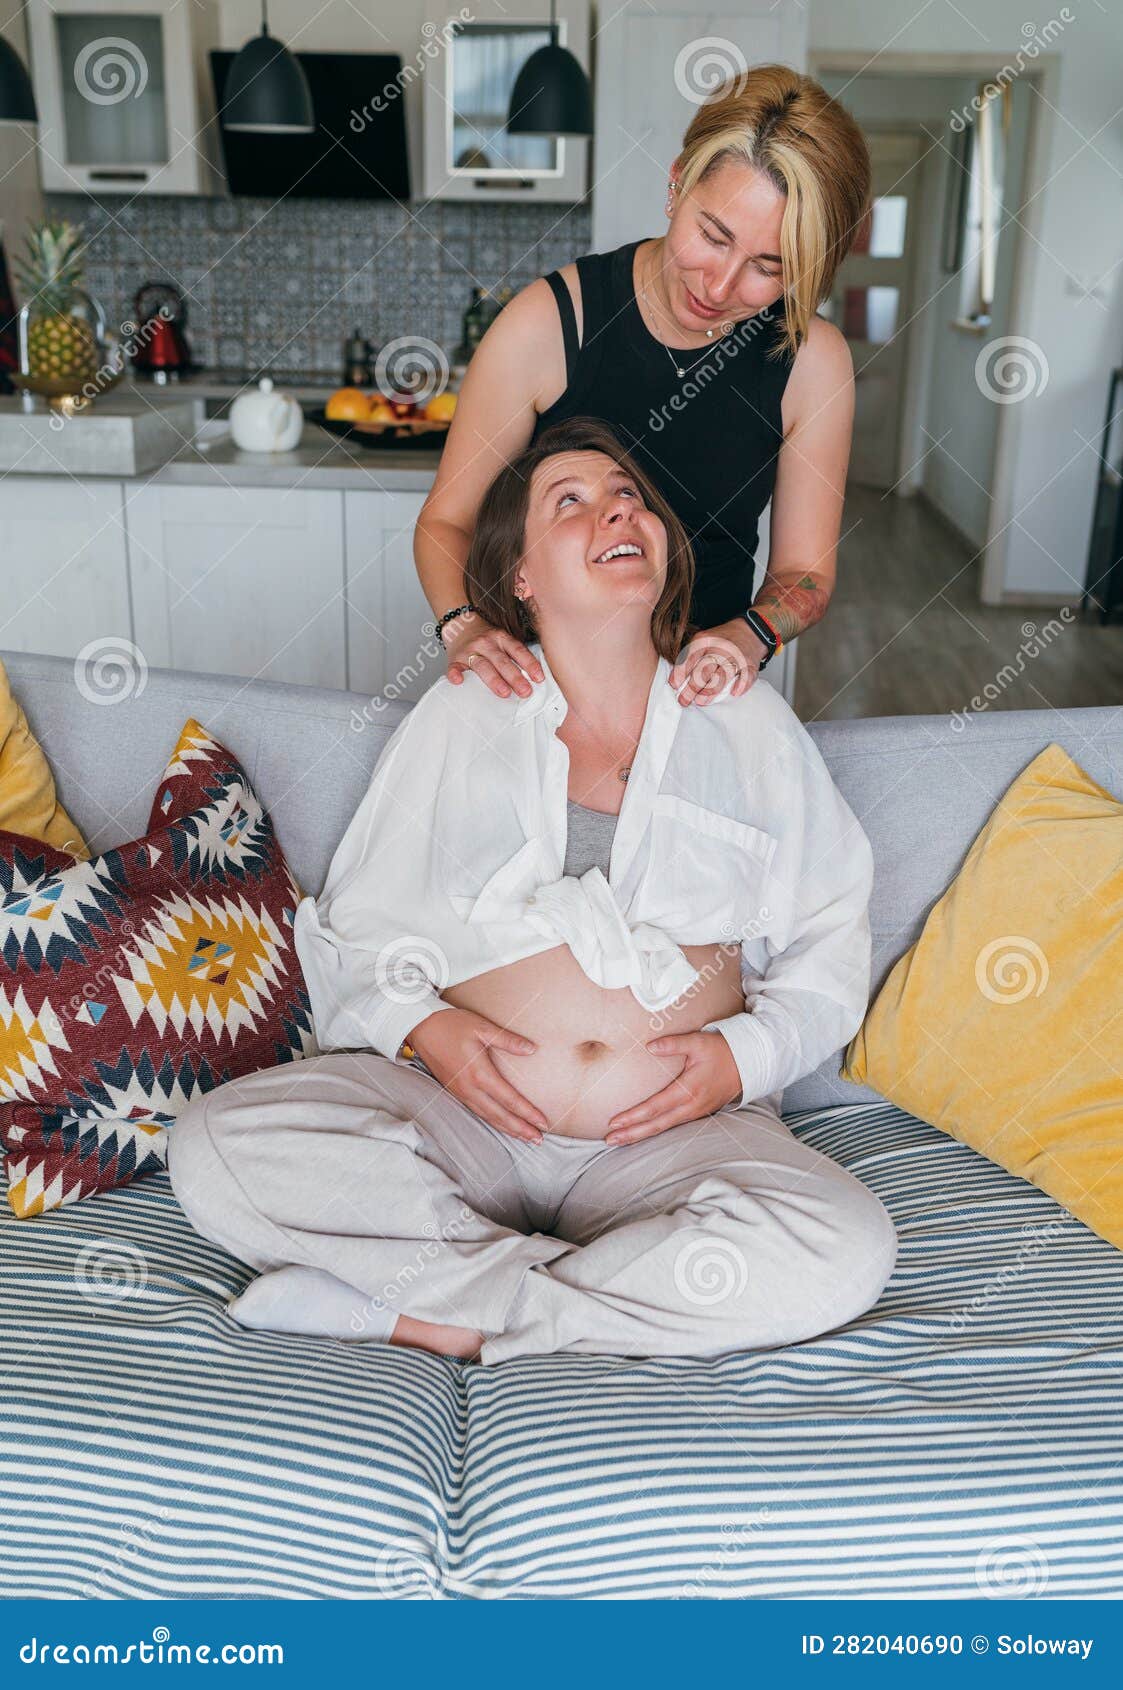 Young Woman Tender Touching Partner S Female Pregnant Belly image